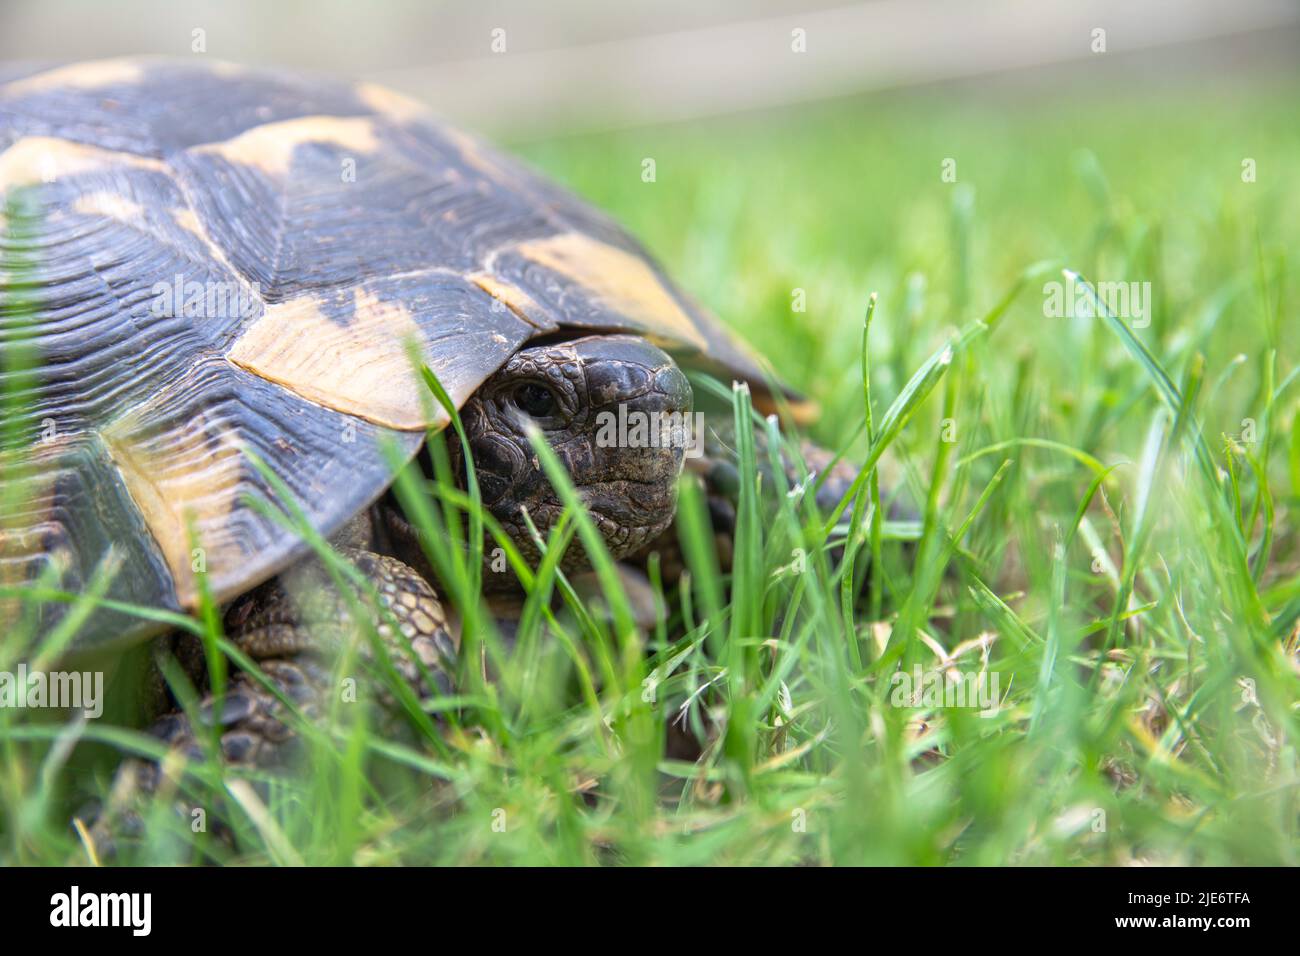 Land Tortoise Sits in the grass Close-up photo. Turtle portrait, shell and tortoise head. Stock Photo